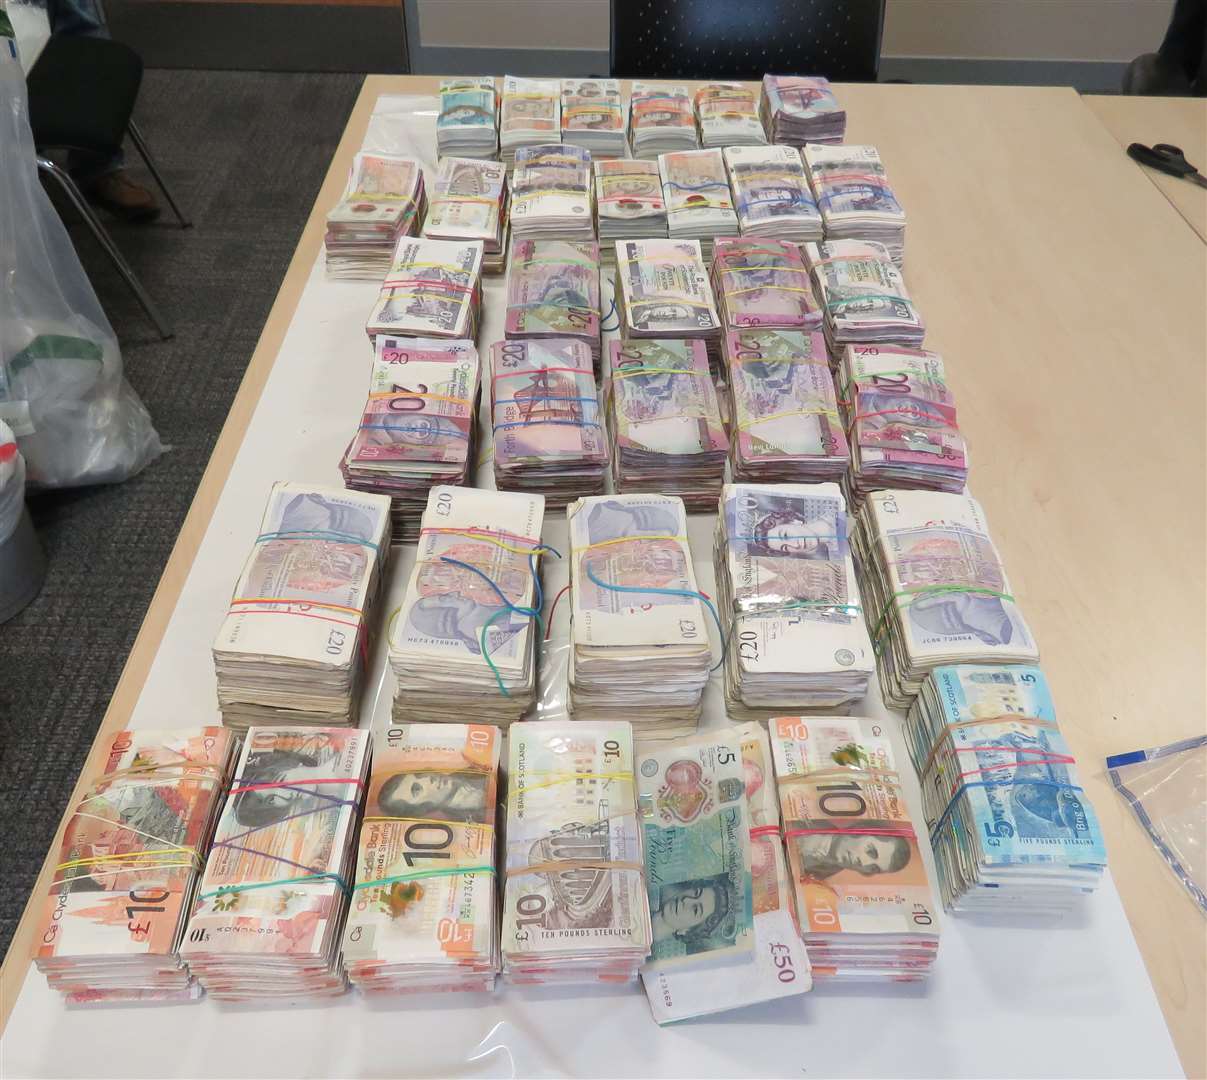 Some of the cash recovered by the National Crime Agency in its operation to stop money laundering